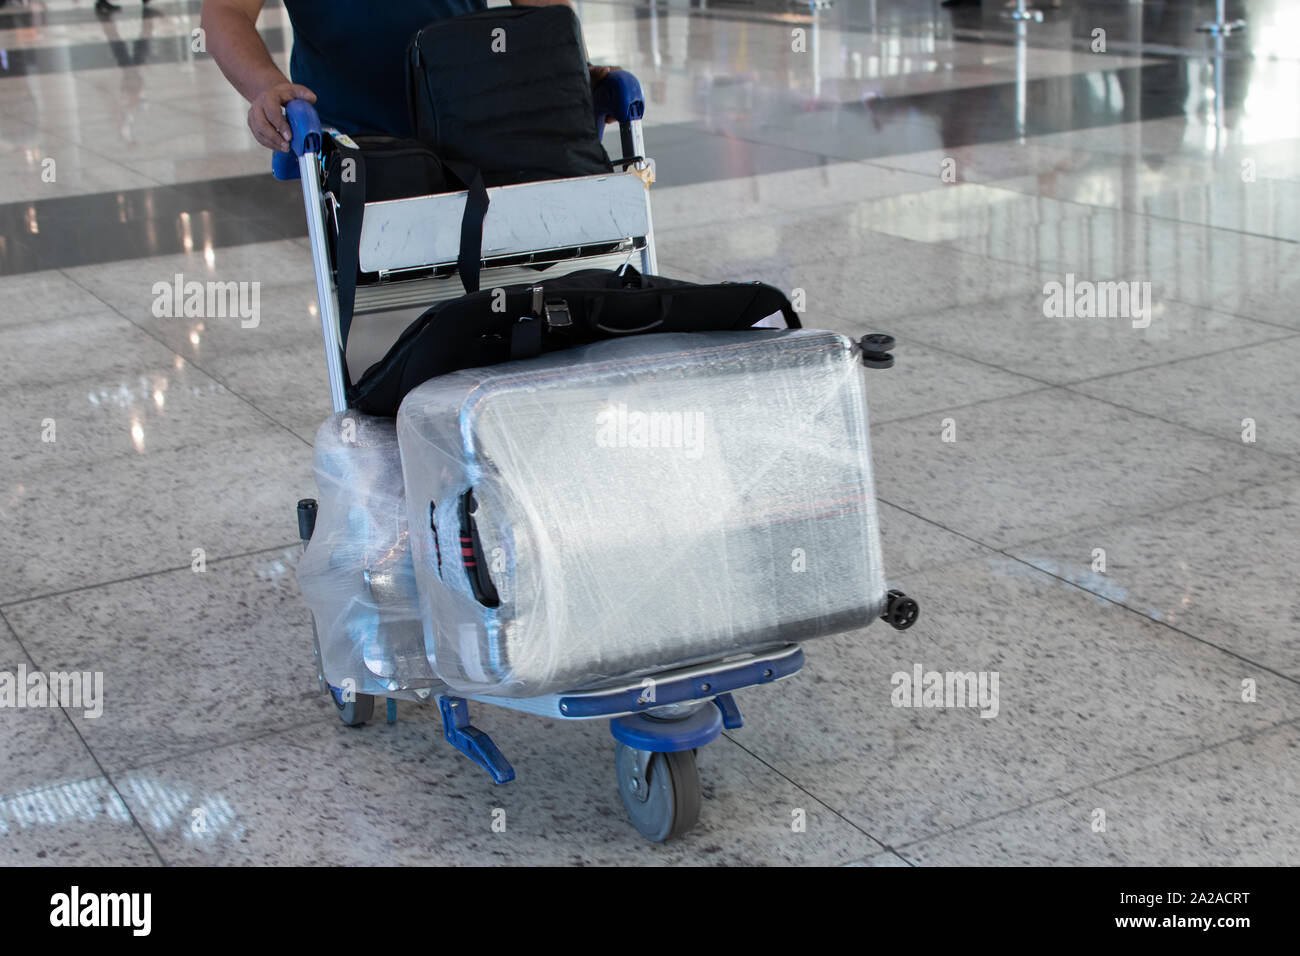 Page 2 - Airport Luggage Trolley High Resolution Stock Photography and  Images - Alamy